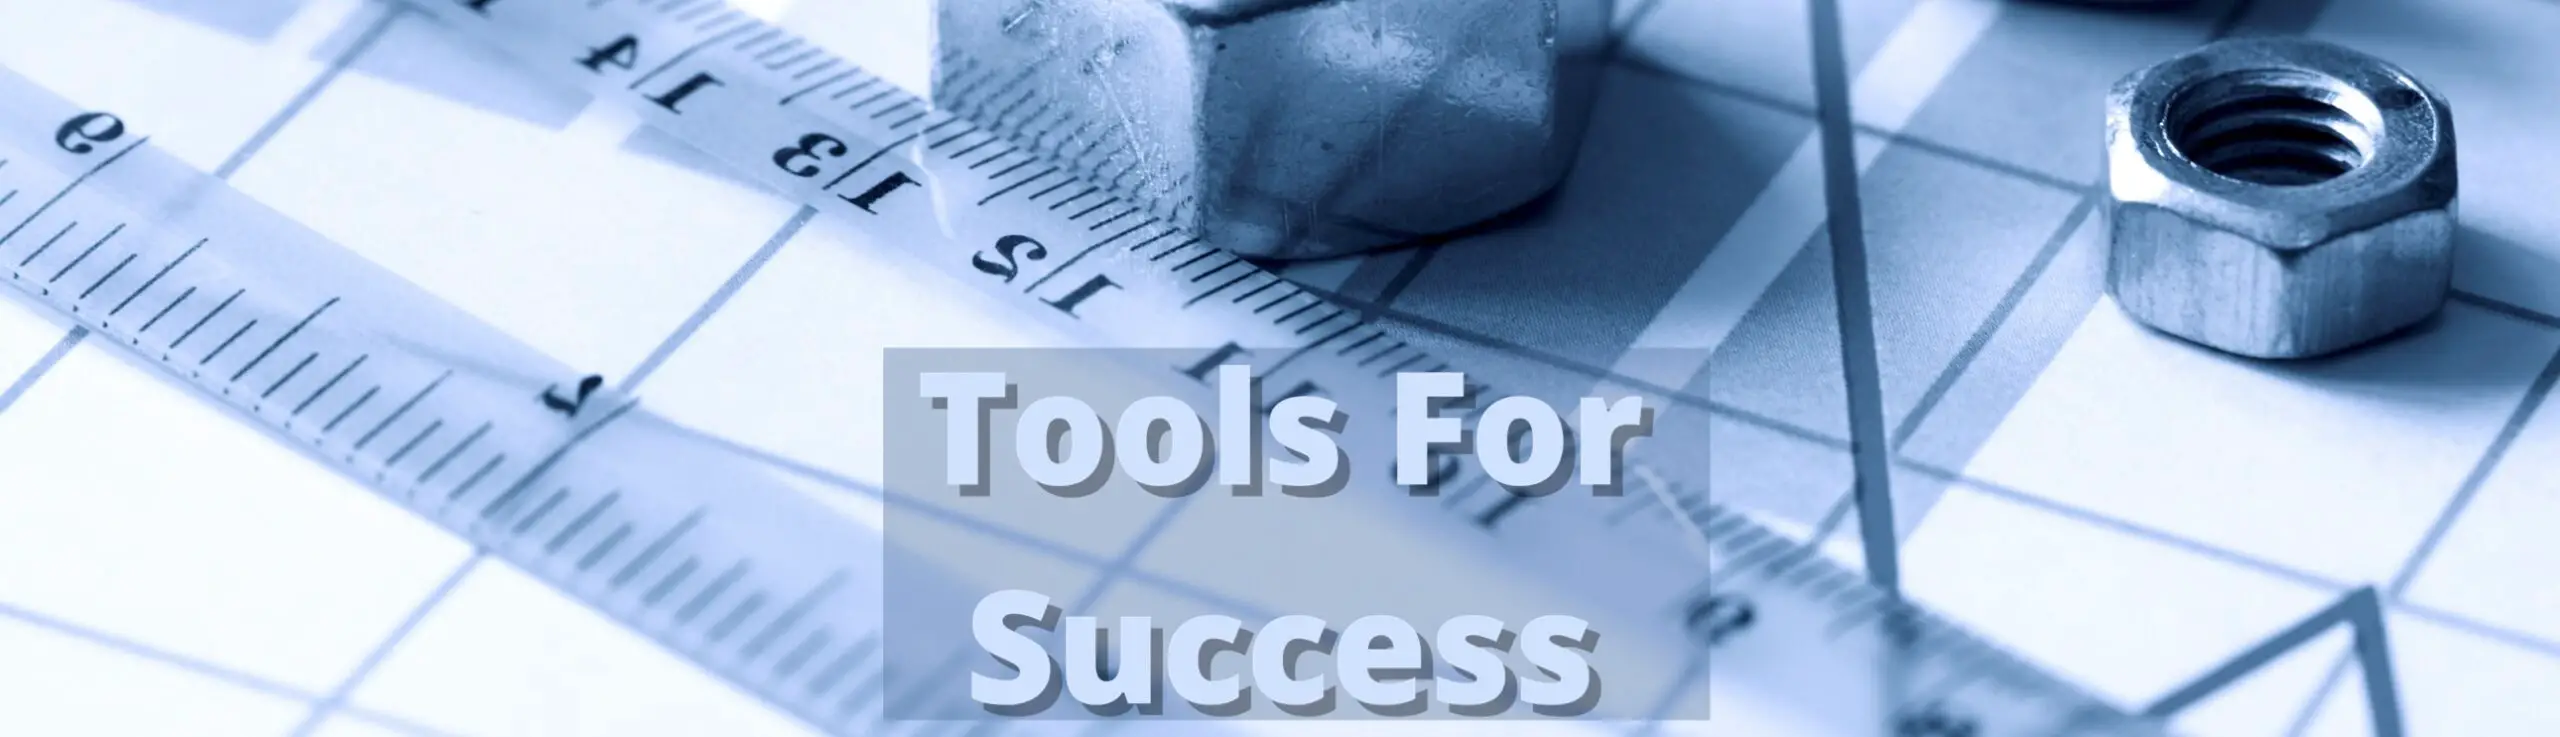 Tools For Success 1